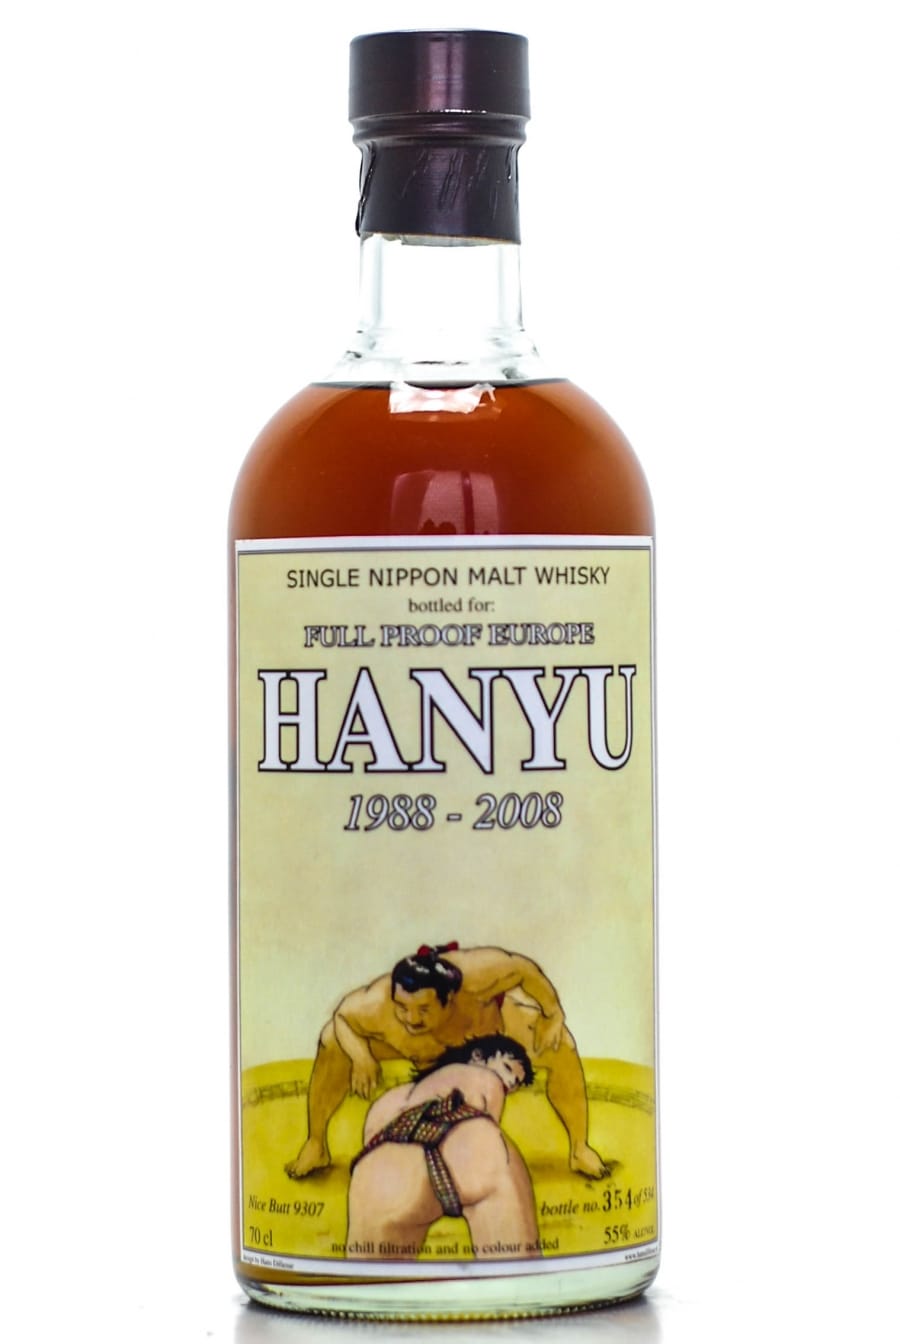 Hanyu - Hanyu 1988: Nice Butt  Single Nippon Malt Whisky Bottled Exclusively For Full Proof Cask: 9307 1 of 534 Bottles 55% 1988 Perfect